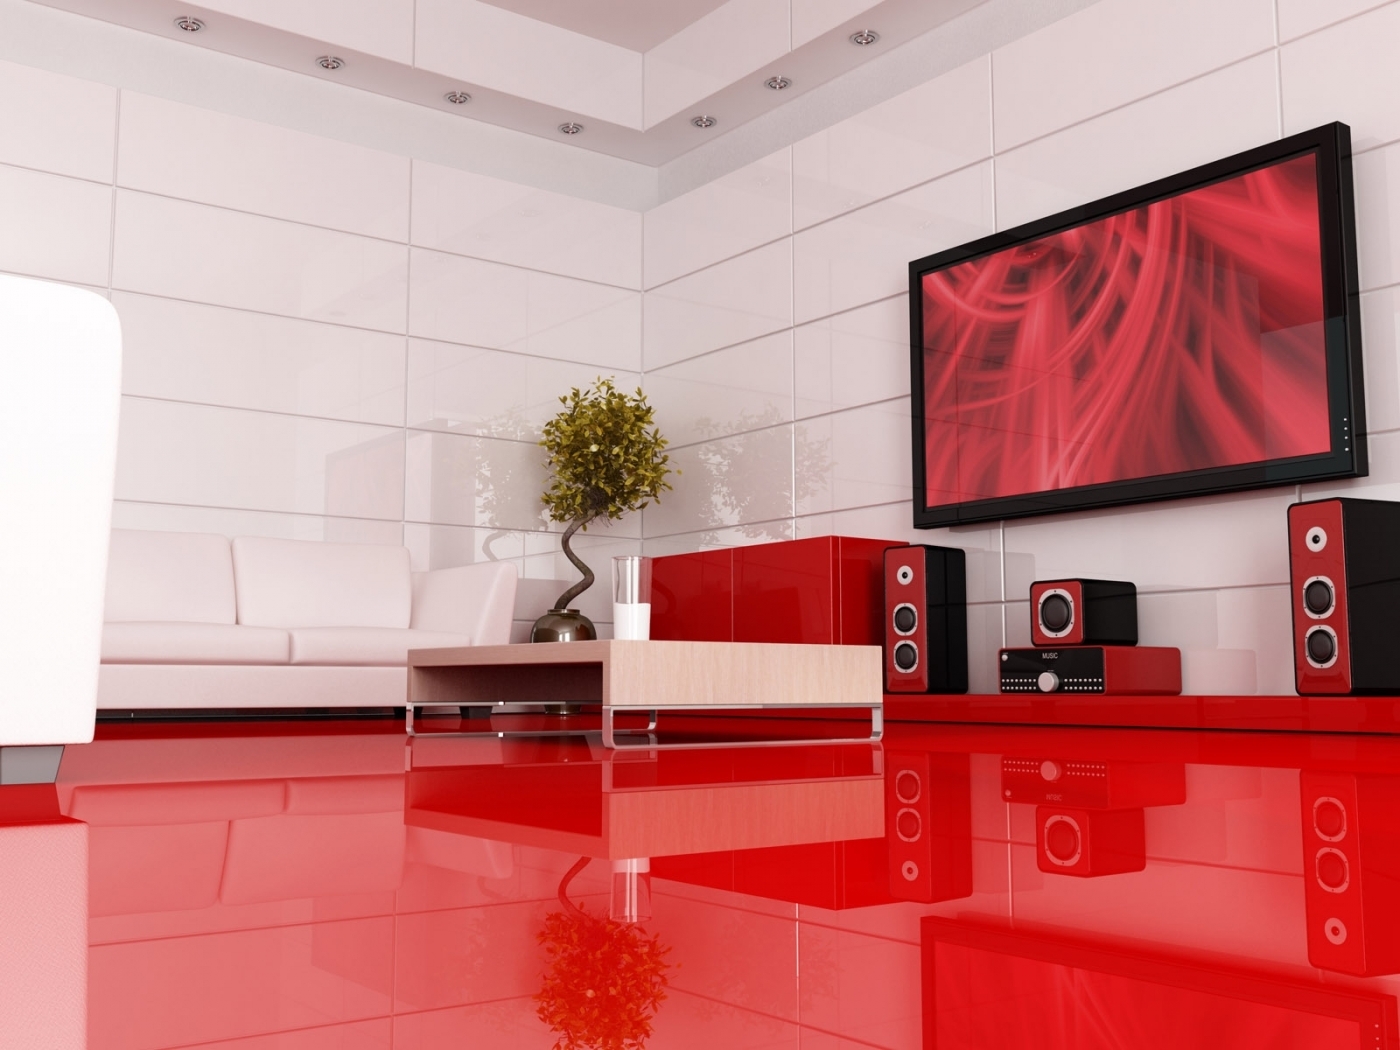 houses, interior, landscape, red images